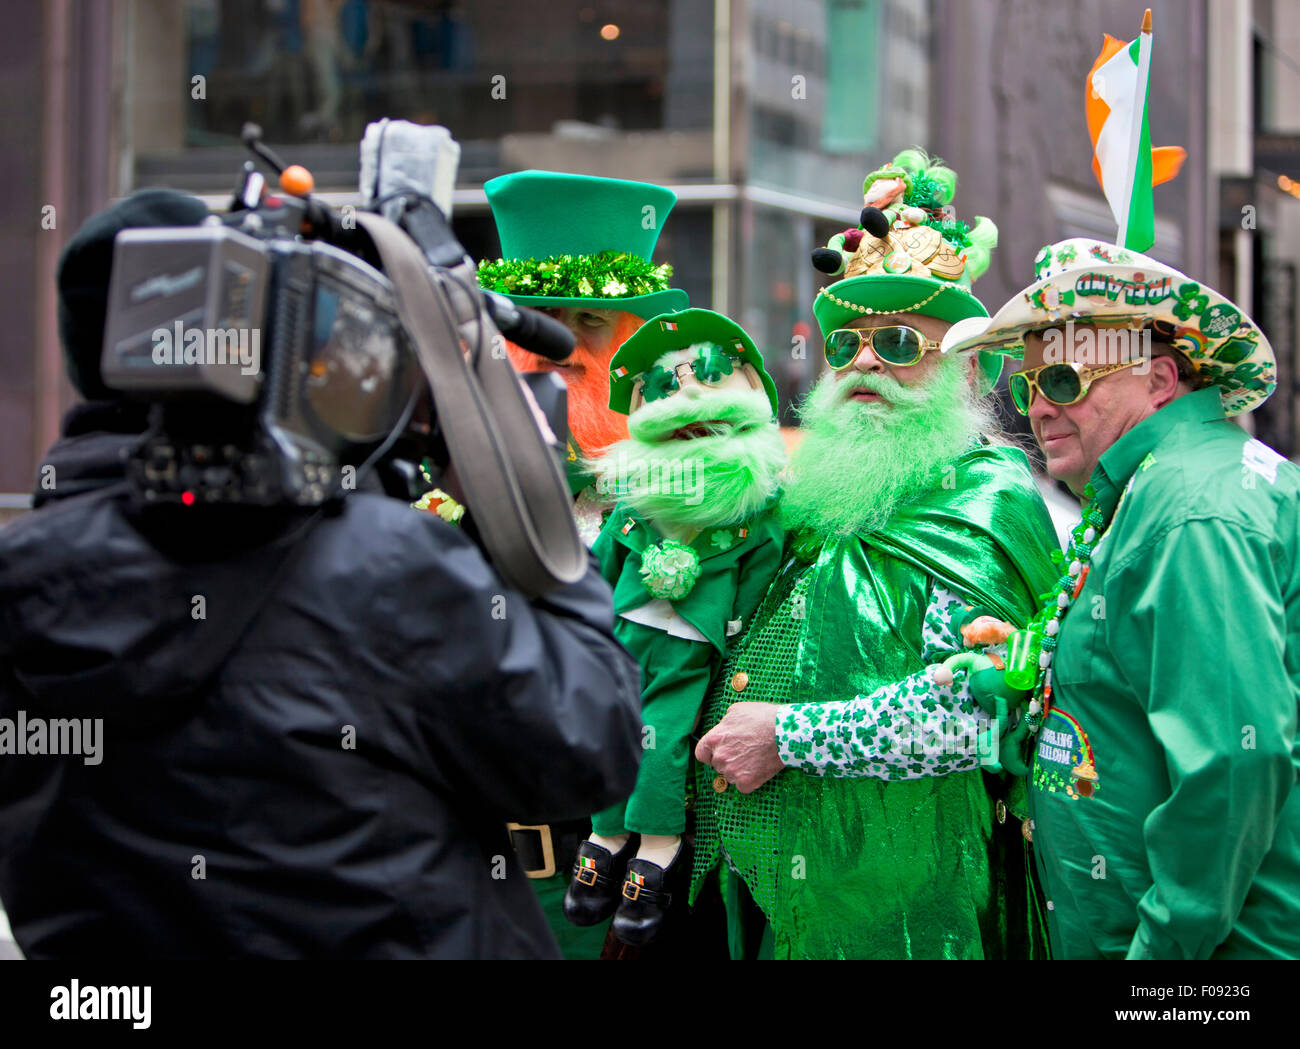 NEW YORK, NY, USA - MAR 17: St. Patrick's Day Parade on March 17, 2013 in New York City, United States. Stock Photo